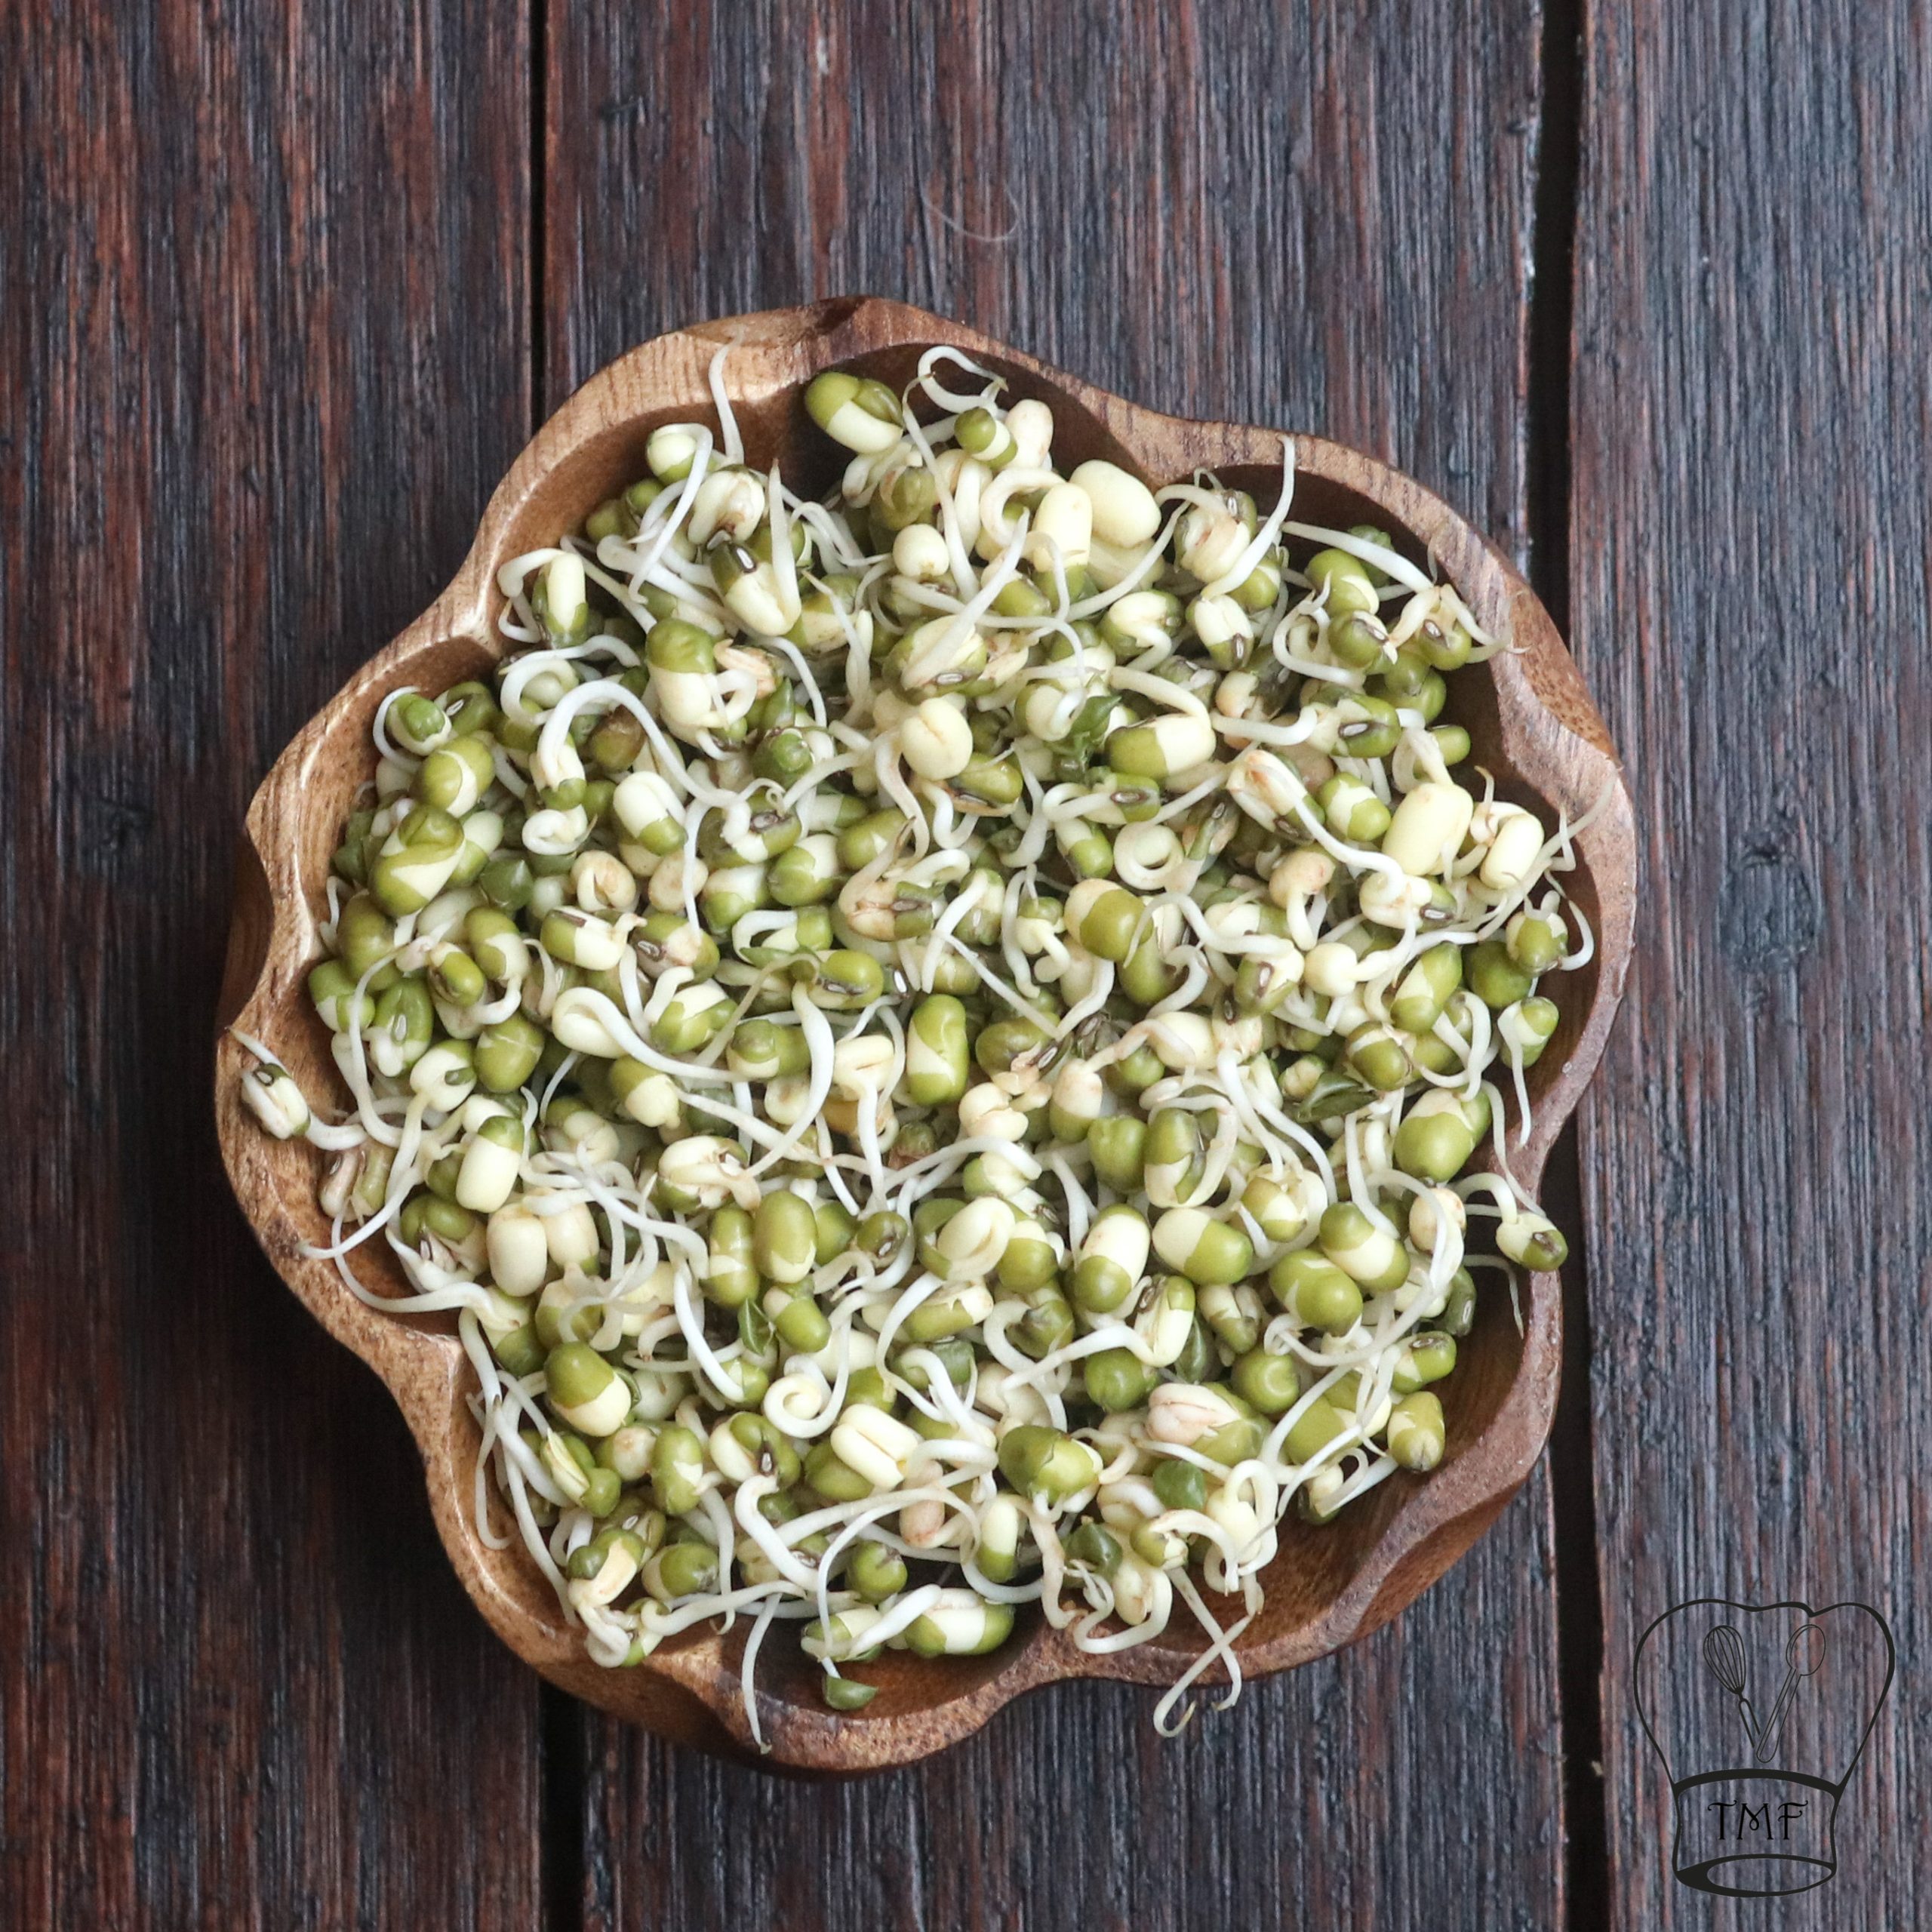 Mung bean sprouts | How to sprout mung beans - Traditionally Modern Food